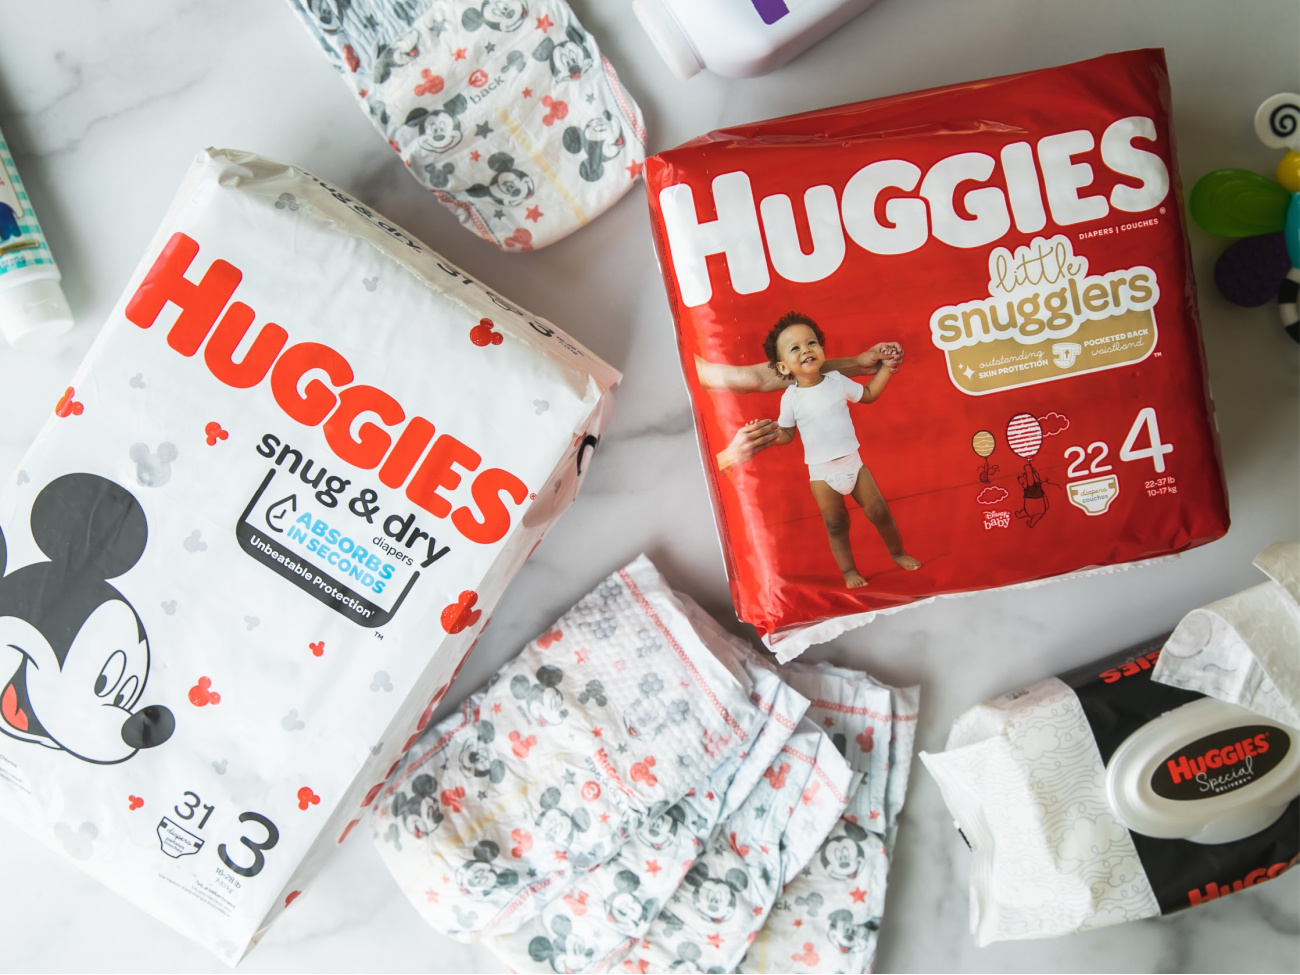 Fantastic Deal On Huggies Diapers This Week At Publix – Diapers As Low As $3.69 Per Pack!